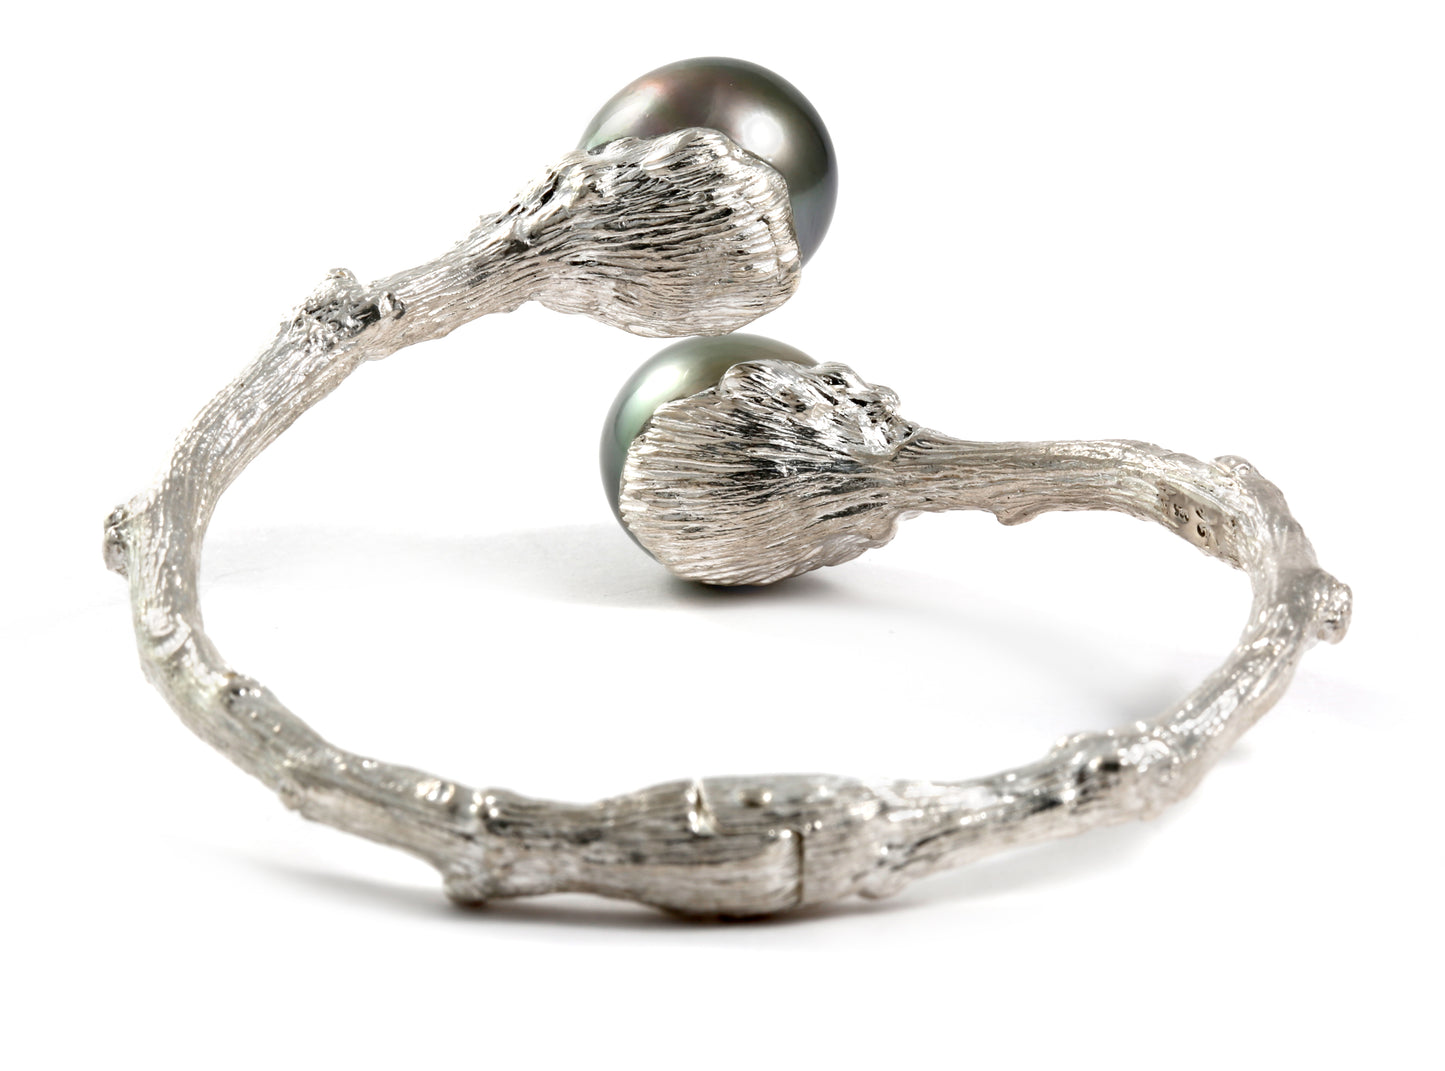 Bypass Torque Cuff with Tahitian Pearls